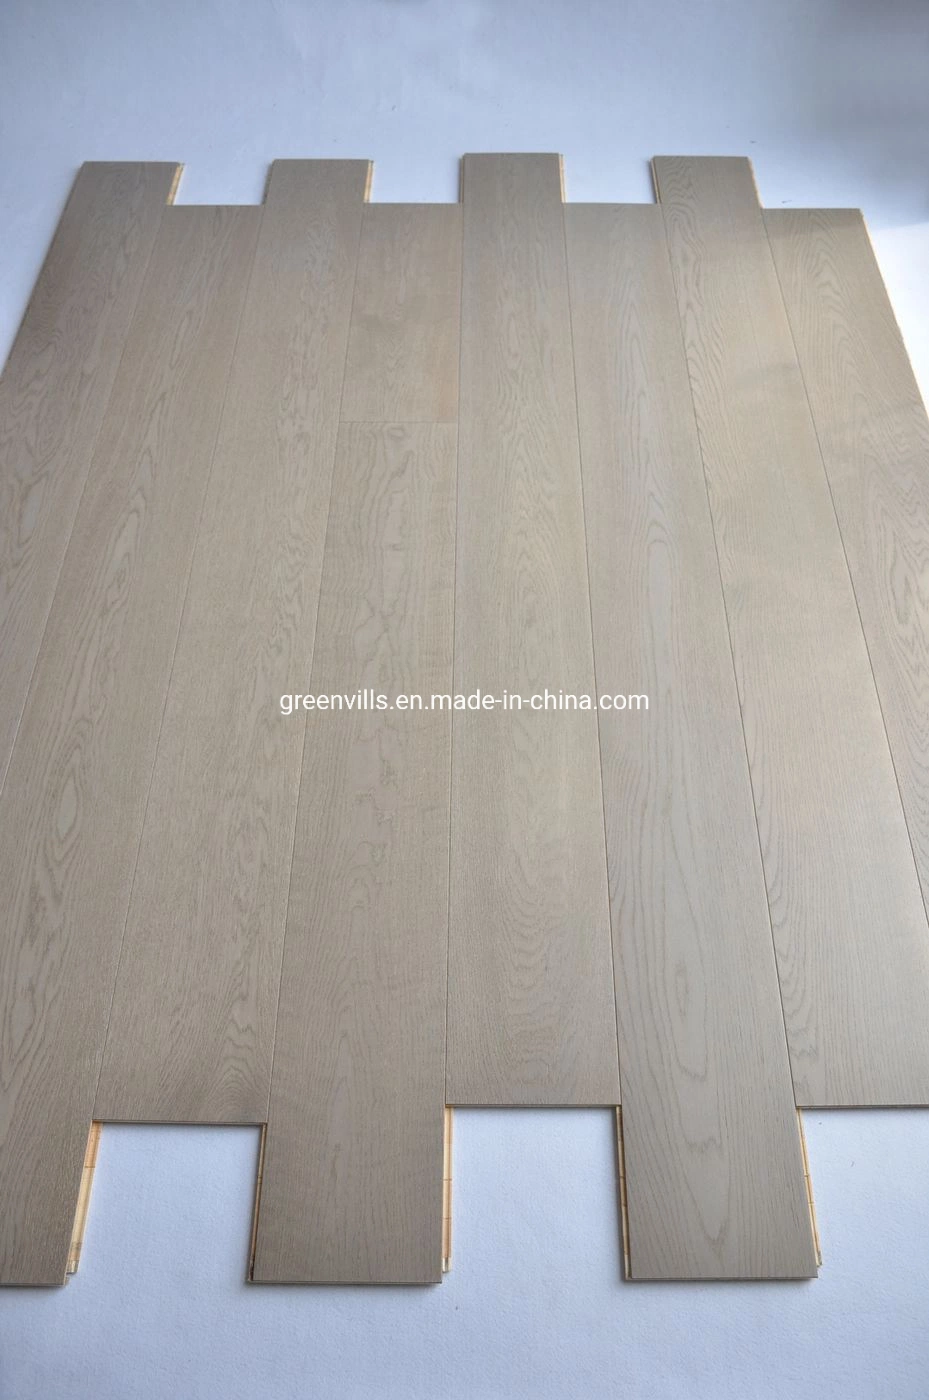 Flooring for Sale Engineered Natural Oak Lacquered Floor Brushed Oak Engineered Wood 15mm Thickness Parquet Timber Flooring/Cheap Parket and Parquett Flooring